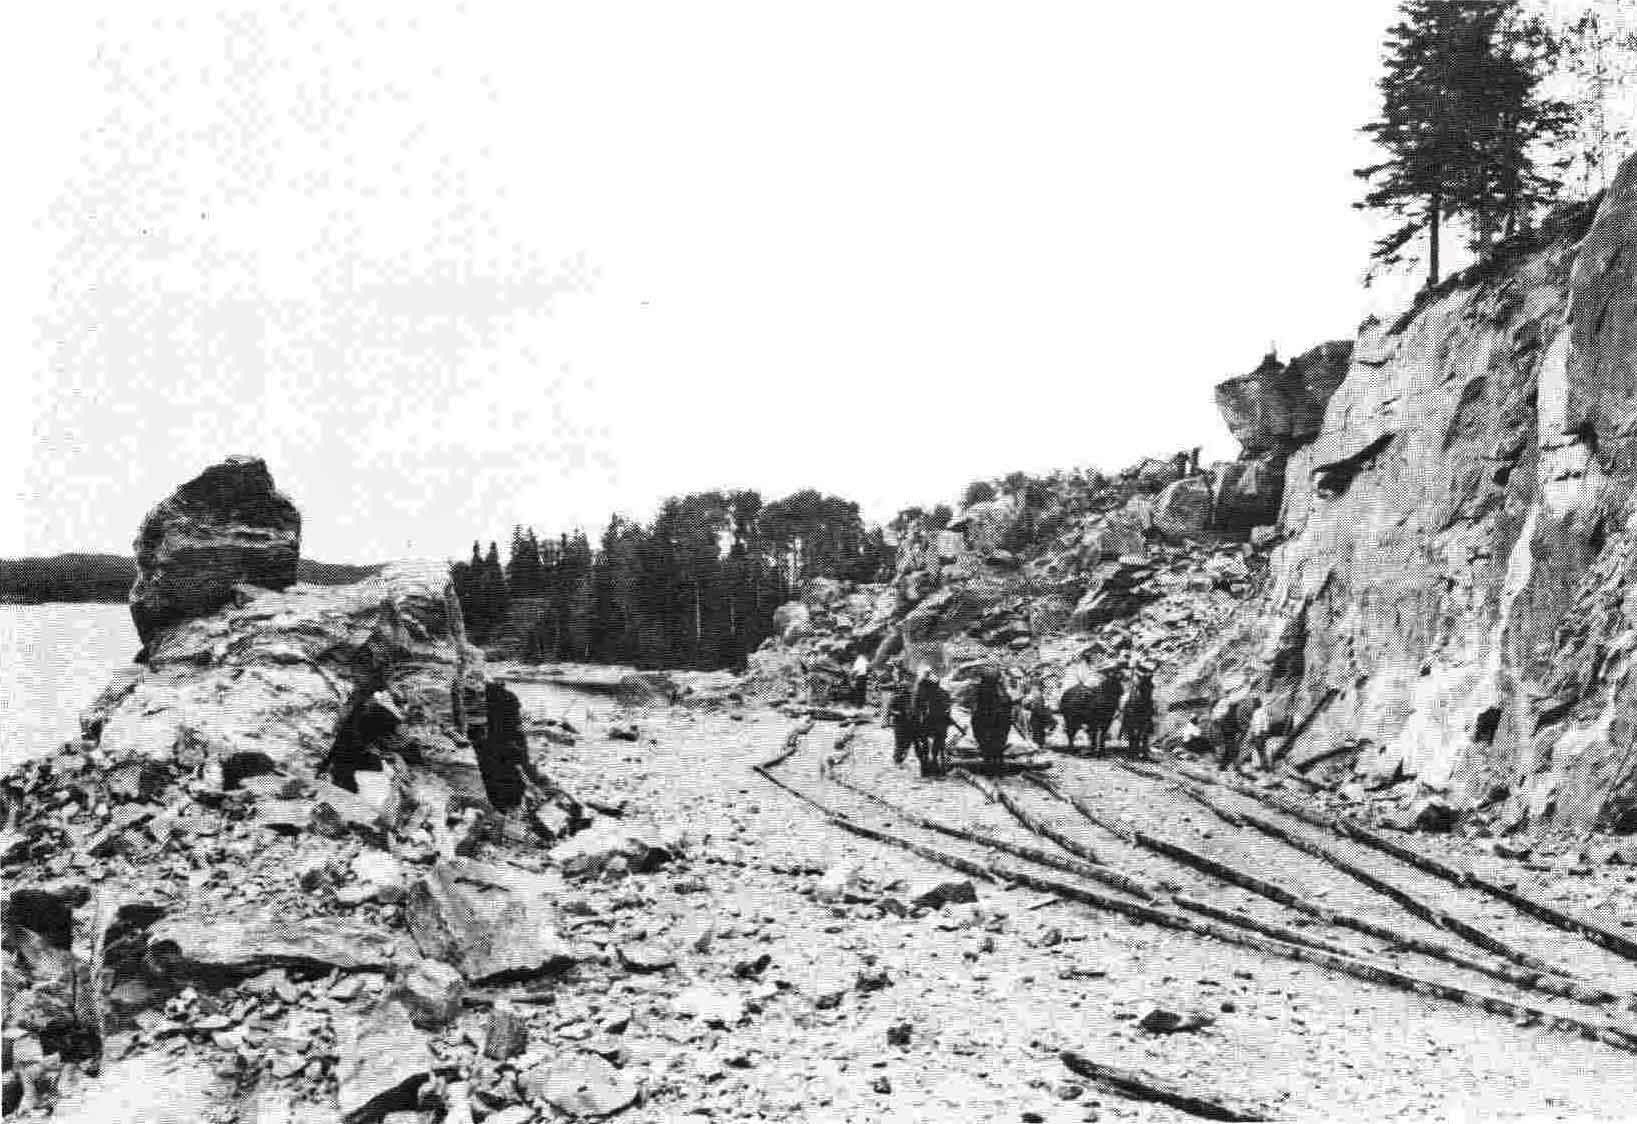 "Horses were used on this section of road along Muncho Lake to haul away the blasted rock."